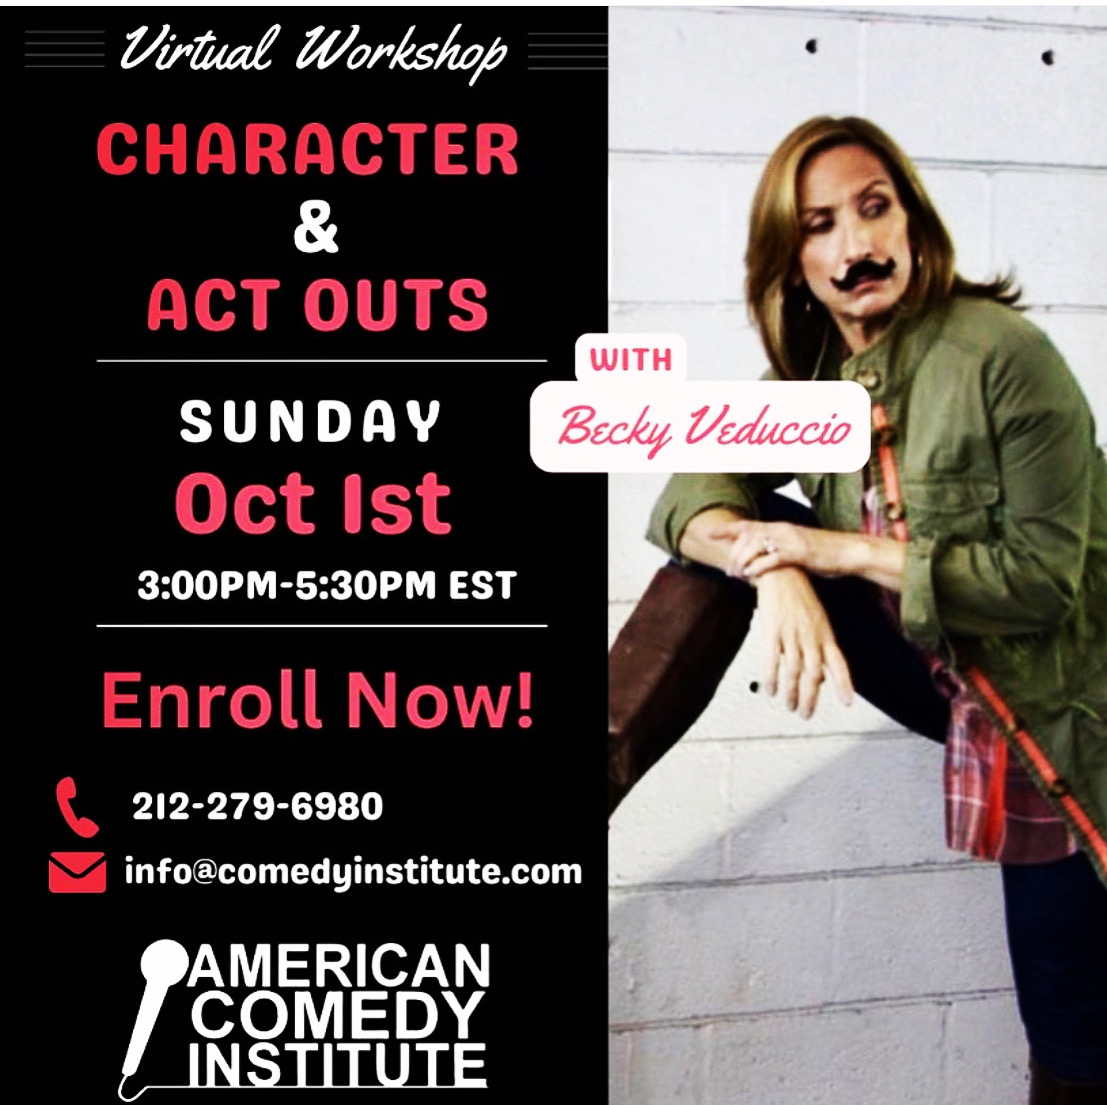 Make your stand-up funnier with act-outs and characters! 

Register now. Spots are limited! 

#beckyvedducio #americancomedyinstitute #virtualworkshop #characters #actouts #fun #specialtyclass #standupcomedy #standupcomedyworkshop #nyccomedyschool #